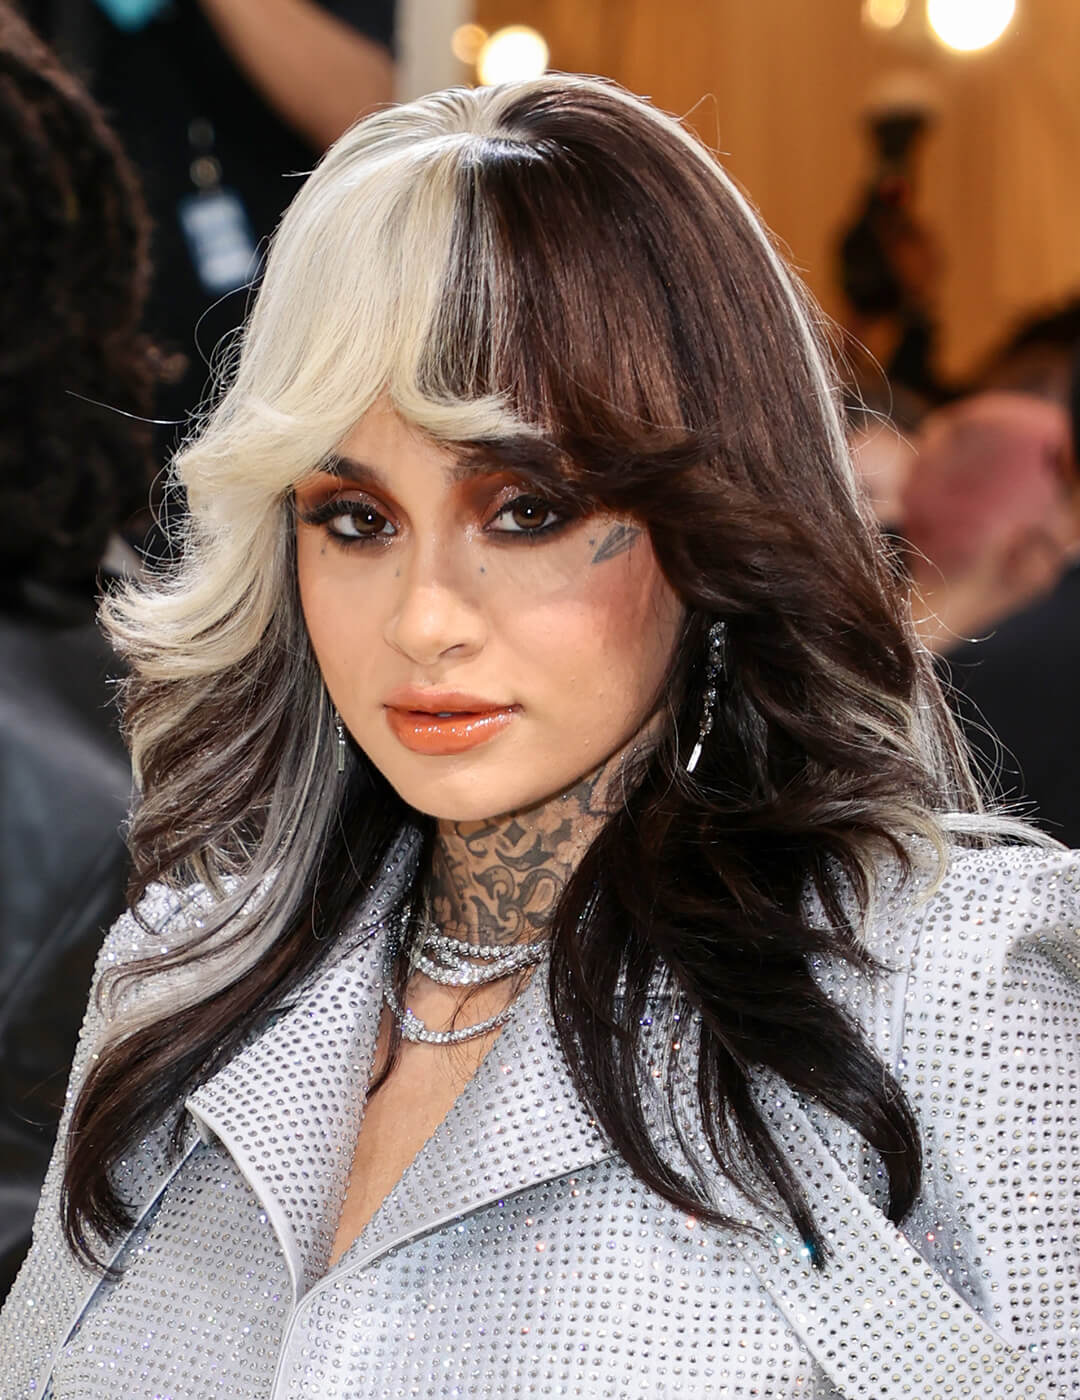 Kehlani rocking the red carpet in a black and white colored hairstyle and futuristic silver outfit